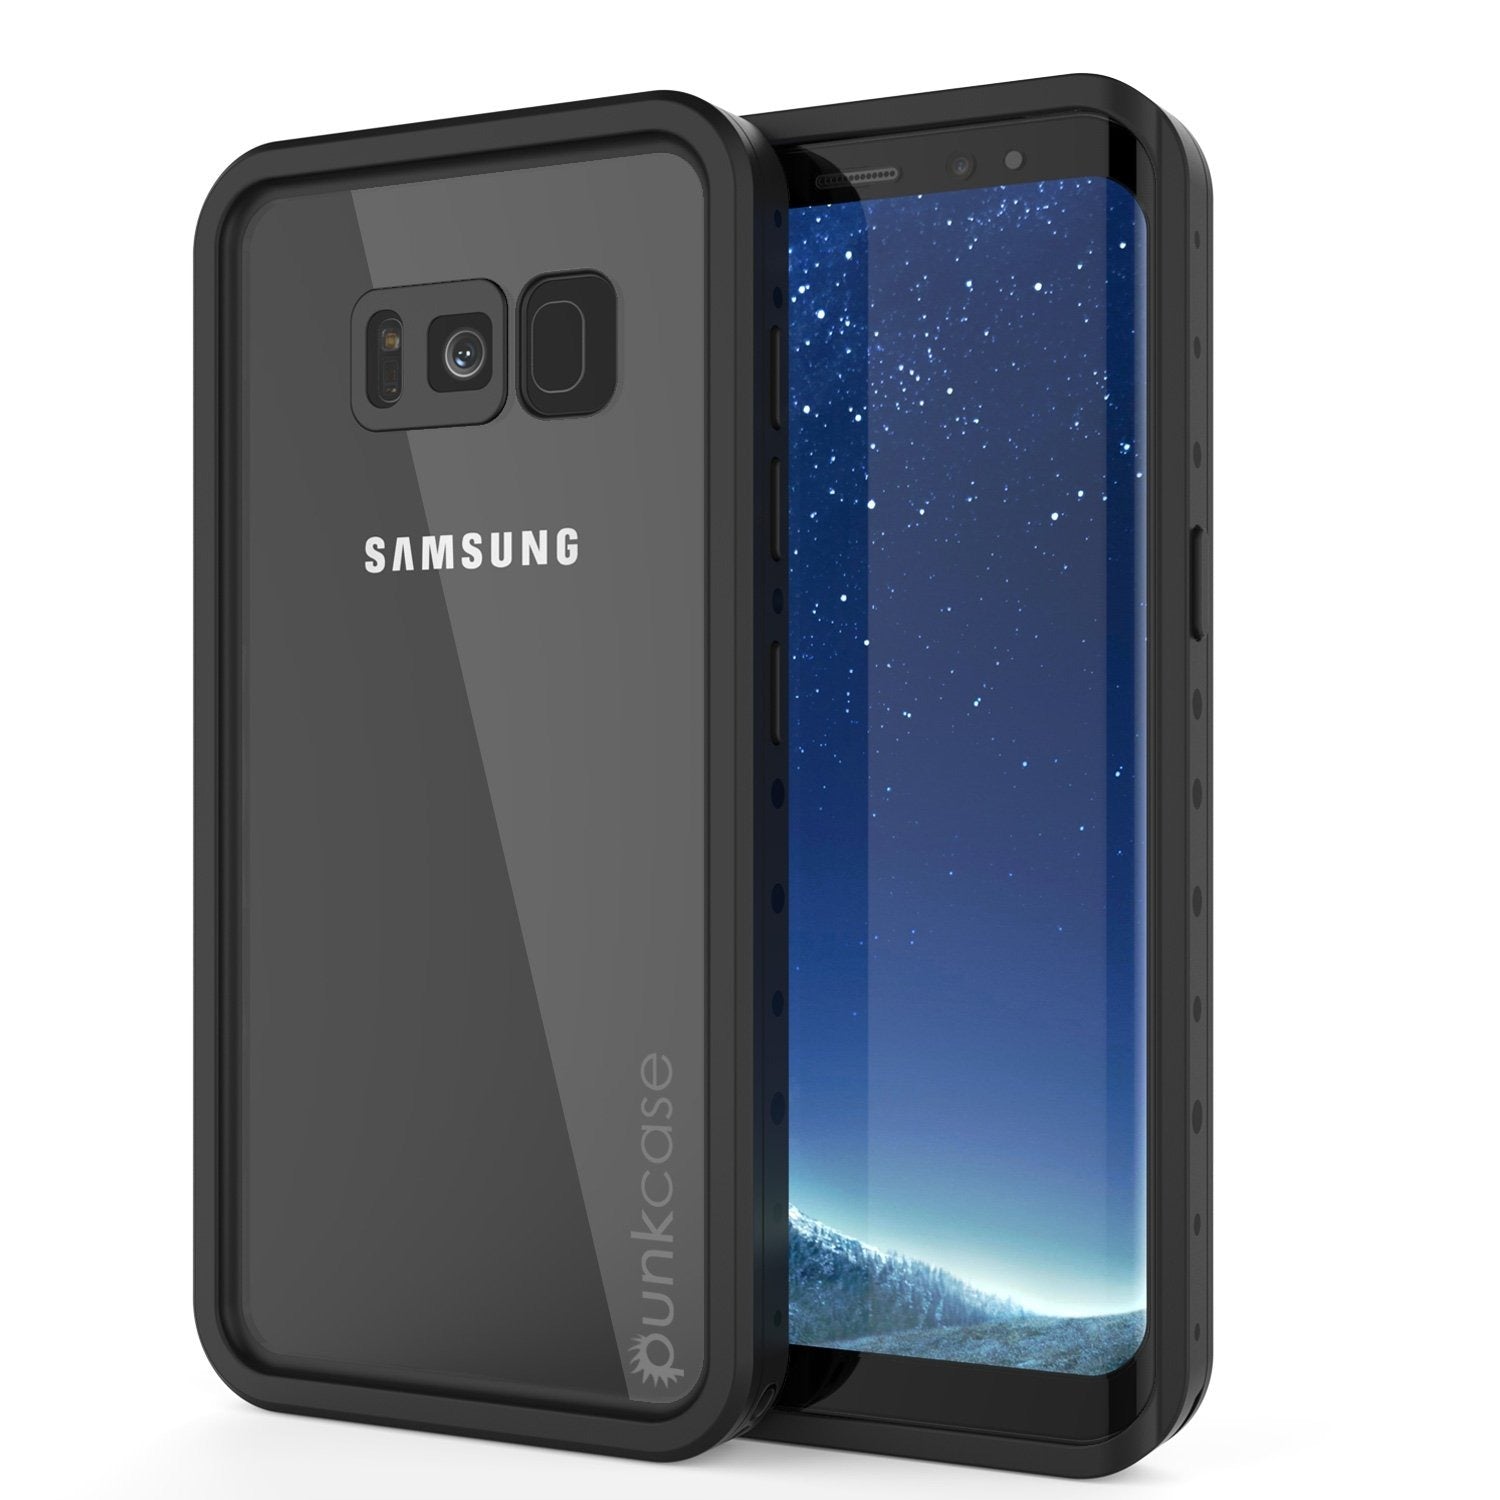 Galaxy S8 Plus Waterproof Case PunkCase StudStar Clear Thin 6.6ft Underwater IP68 Shock/Snow Proof (Color in image: Clear)